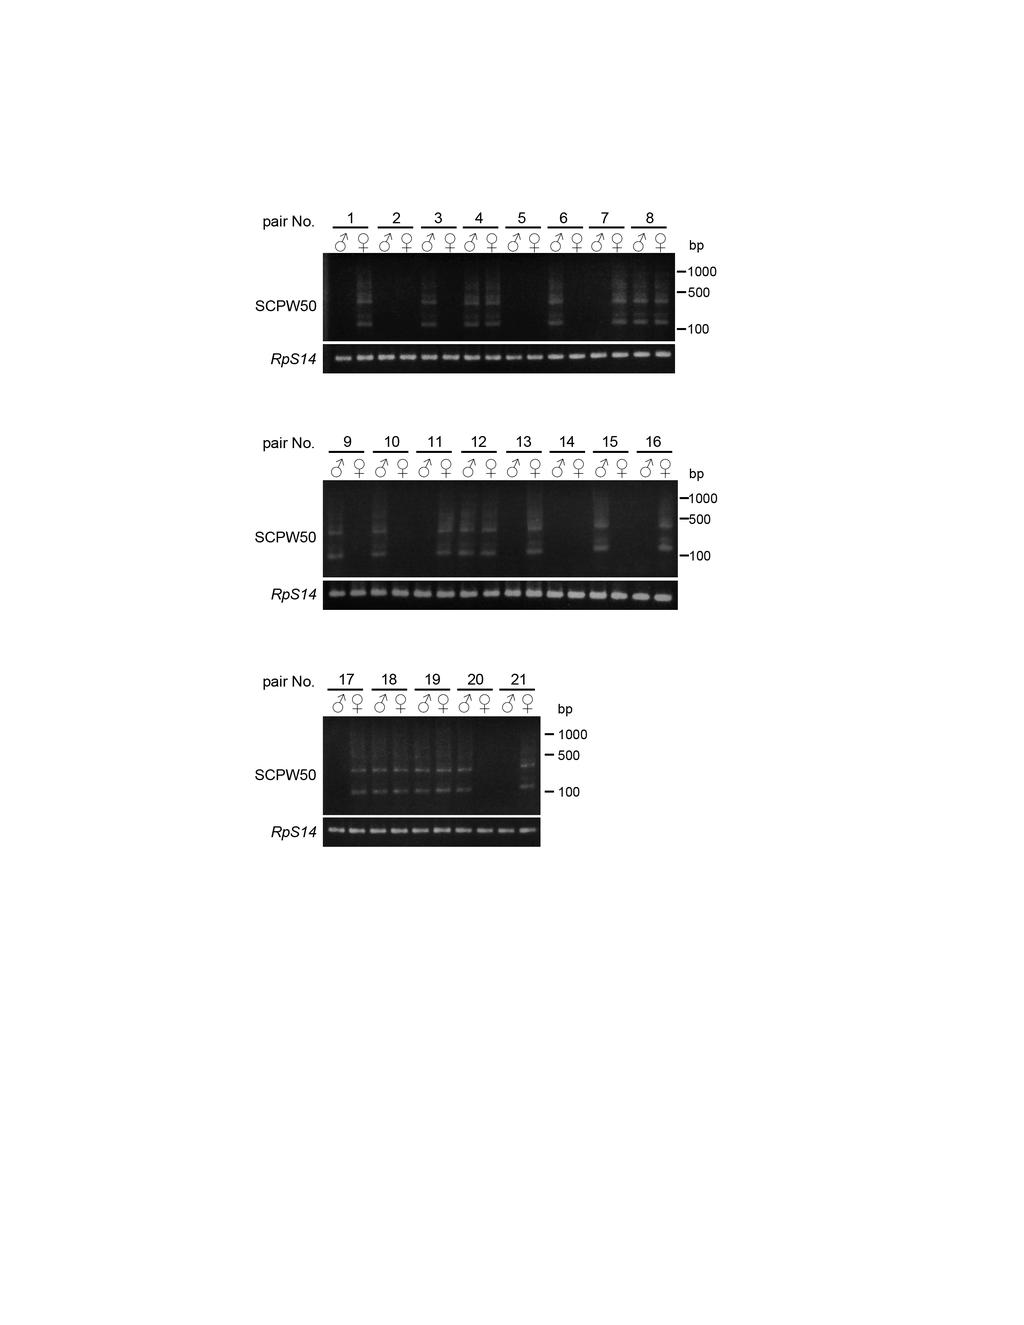 Supplementary Figure S4 Gels showing PCR detection of the W chromosome marker in genomic DNAs of 21 pairs of F 2 hybrids from crosses between Samia cynthia pryeri females and Samia cynthia walkeri